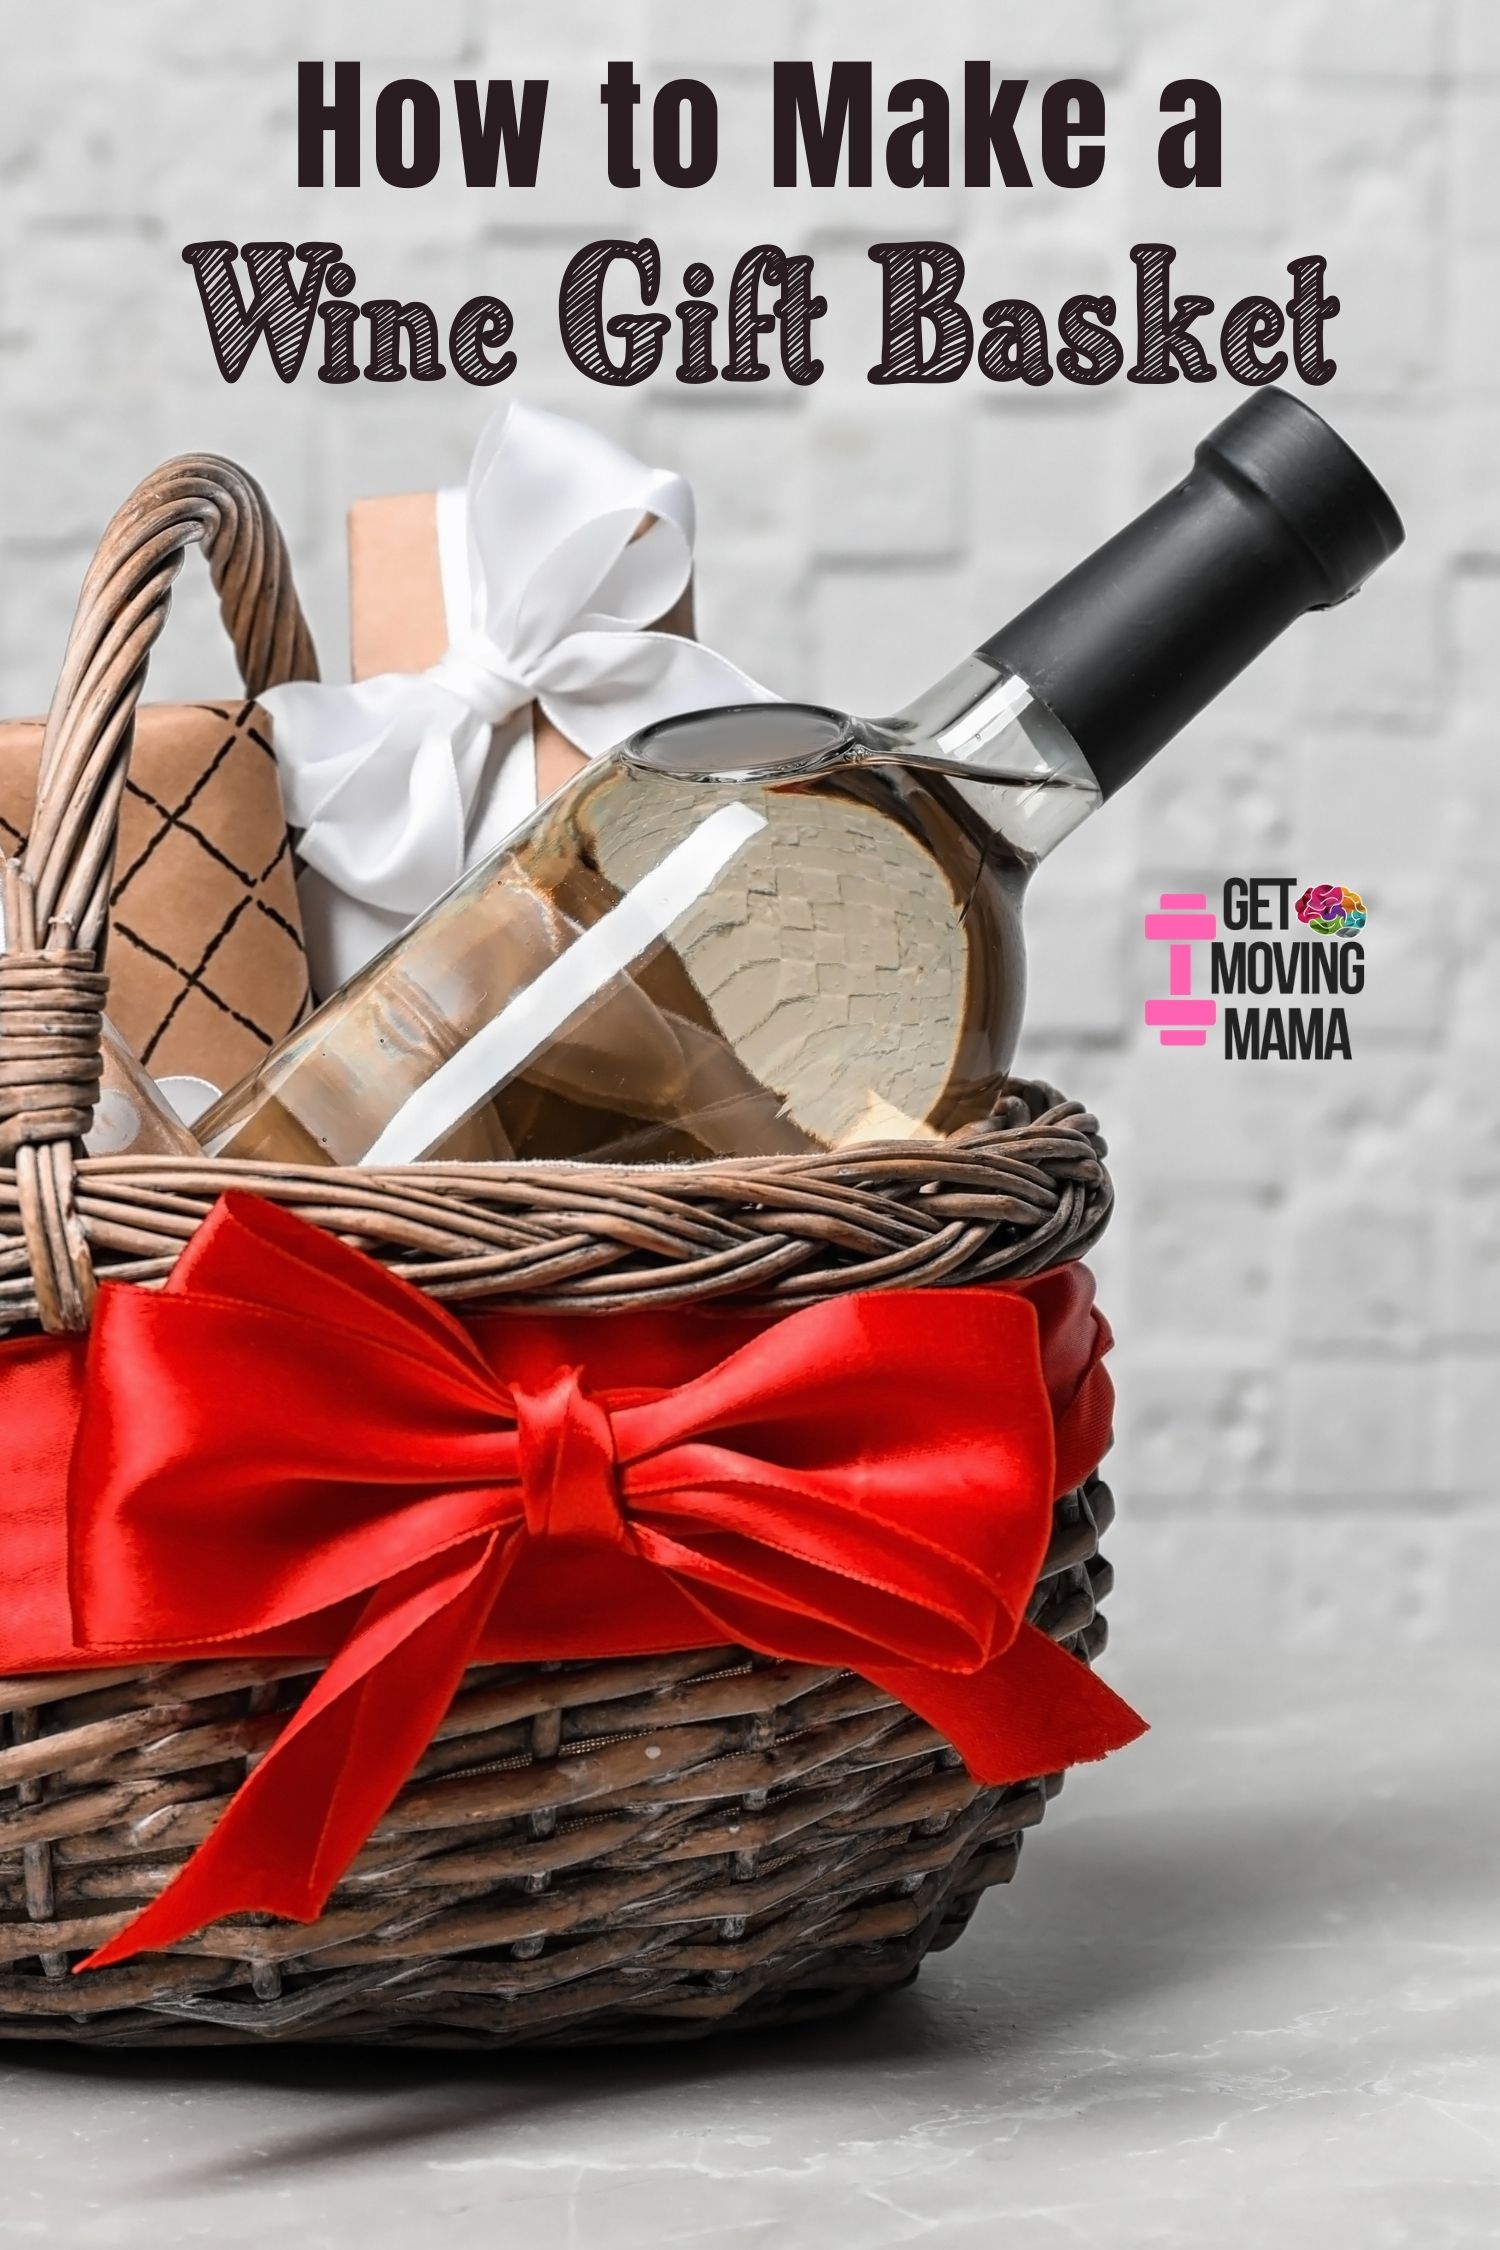 A picture of a wedding wine gift basket with a red bow on it.